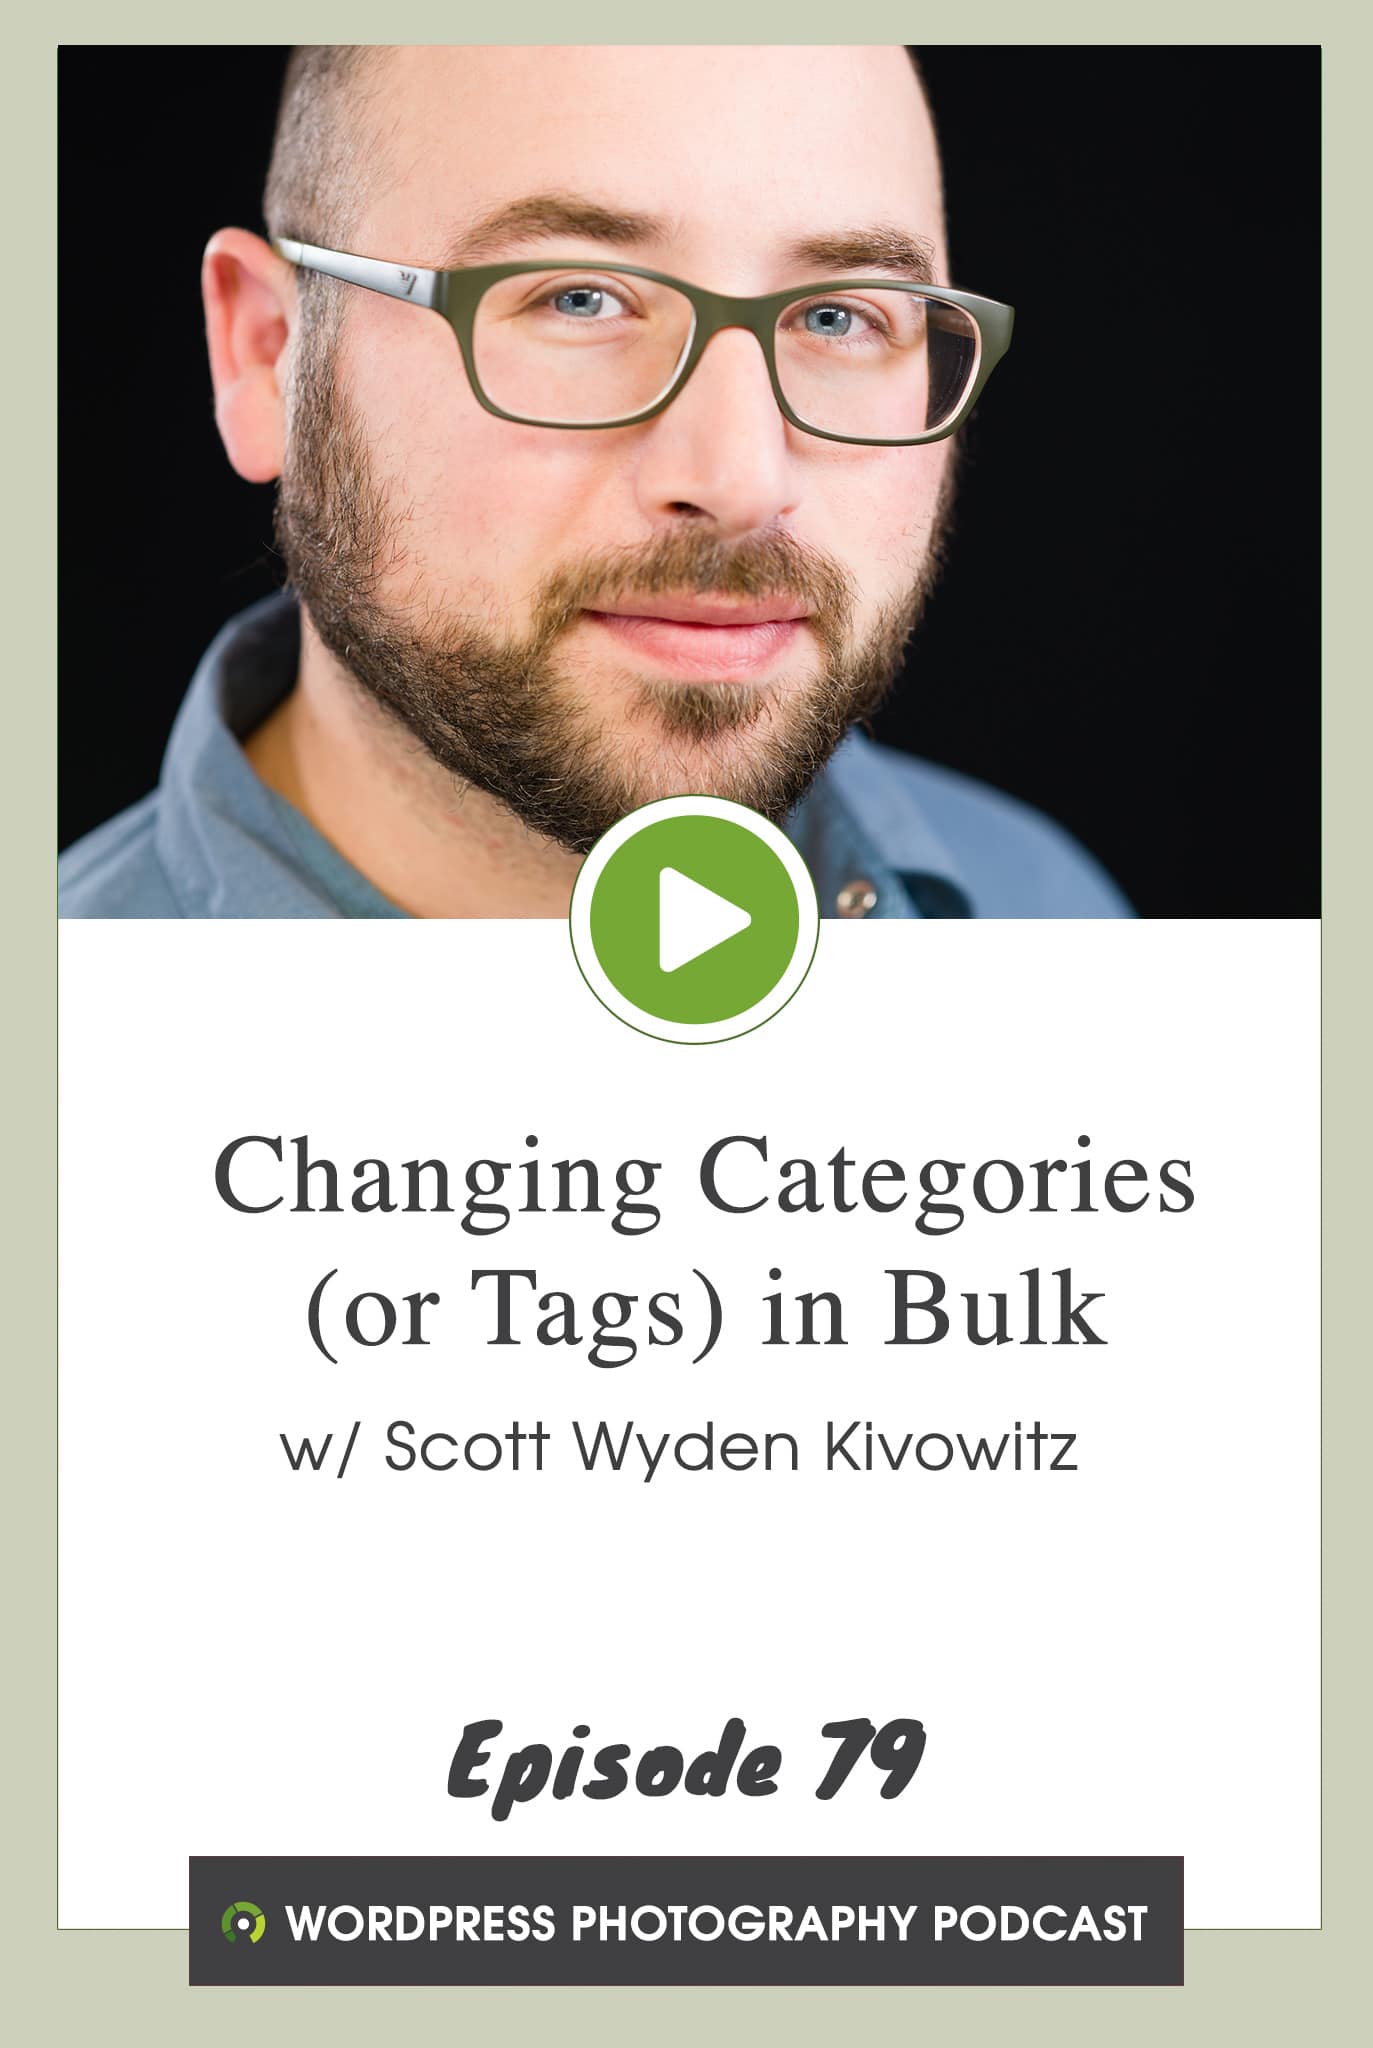 Episode 79 – Changing Categories (and Tags) in Bulk